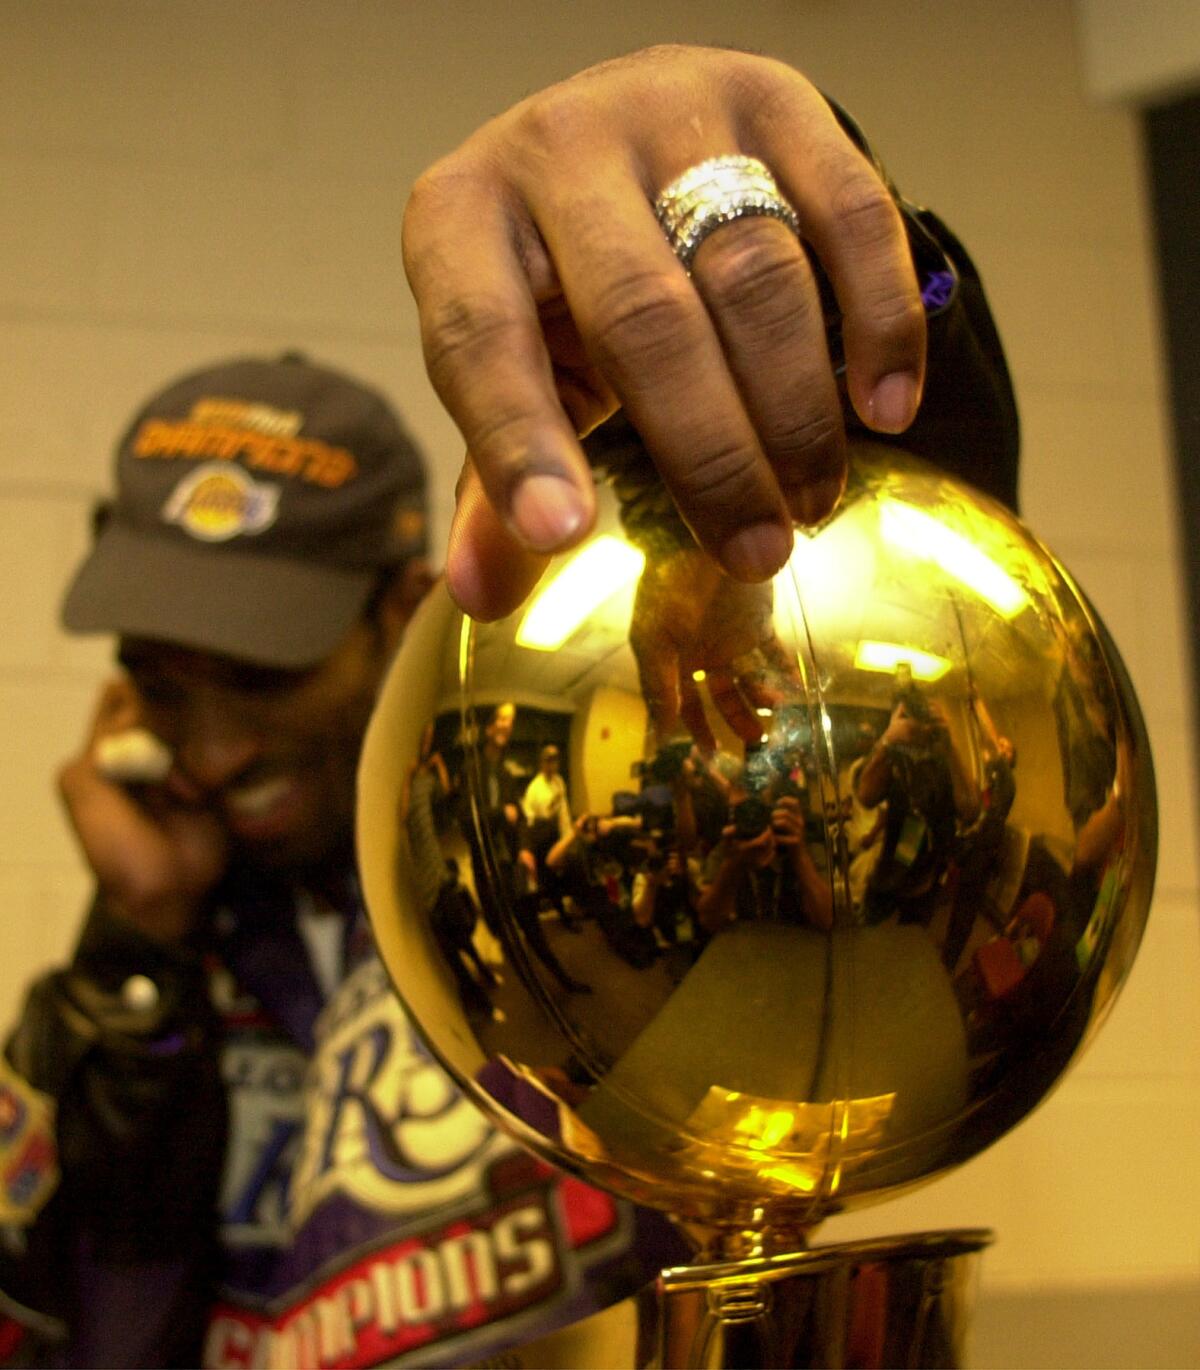 Kobe attempts a reverse layup along the baseline. (Robert Gauthier / Los Angeles Times). Kobe poses with the Championship trophy. (Wally Skalij / Los Angeles Times)